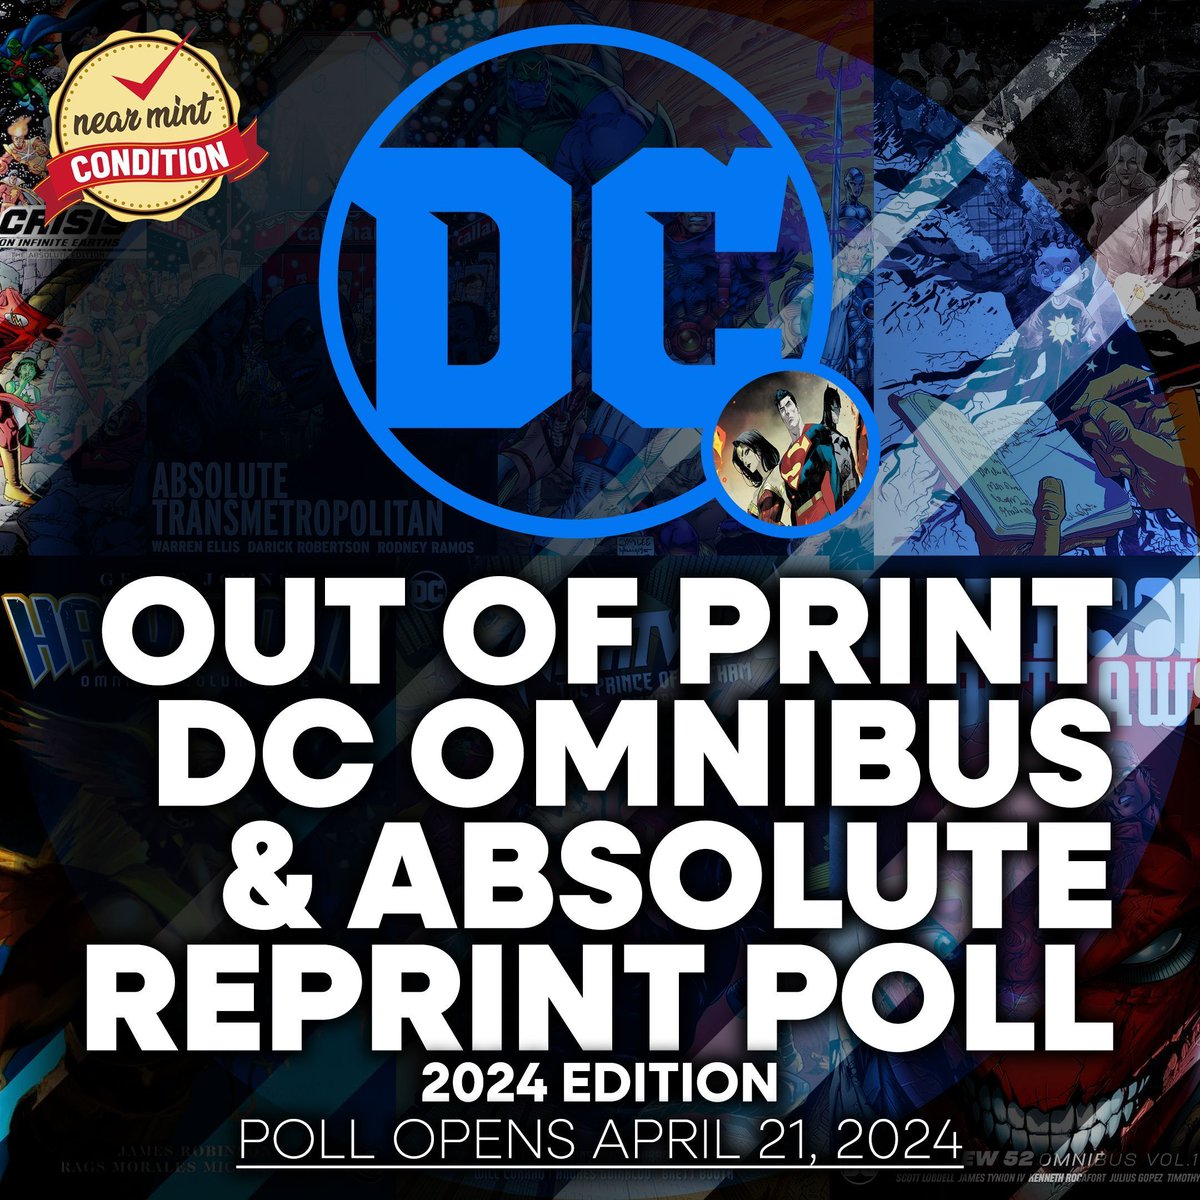 GET READY, MINTIES! Tomorrow the Uncanny Omar and the Gang will be kicking off the MOST WANTED OUT-OF- PRINT DC OMNIBUS & ABSOLUTE REPRINT POLL! And we are kicking it off with a LIVE SHOW! Tell all your friends and join us in the chat at 11:30AM EST!